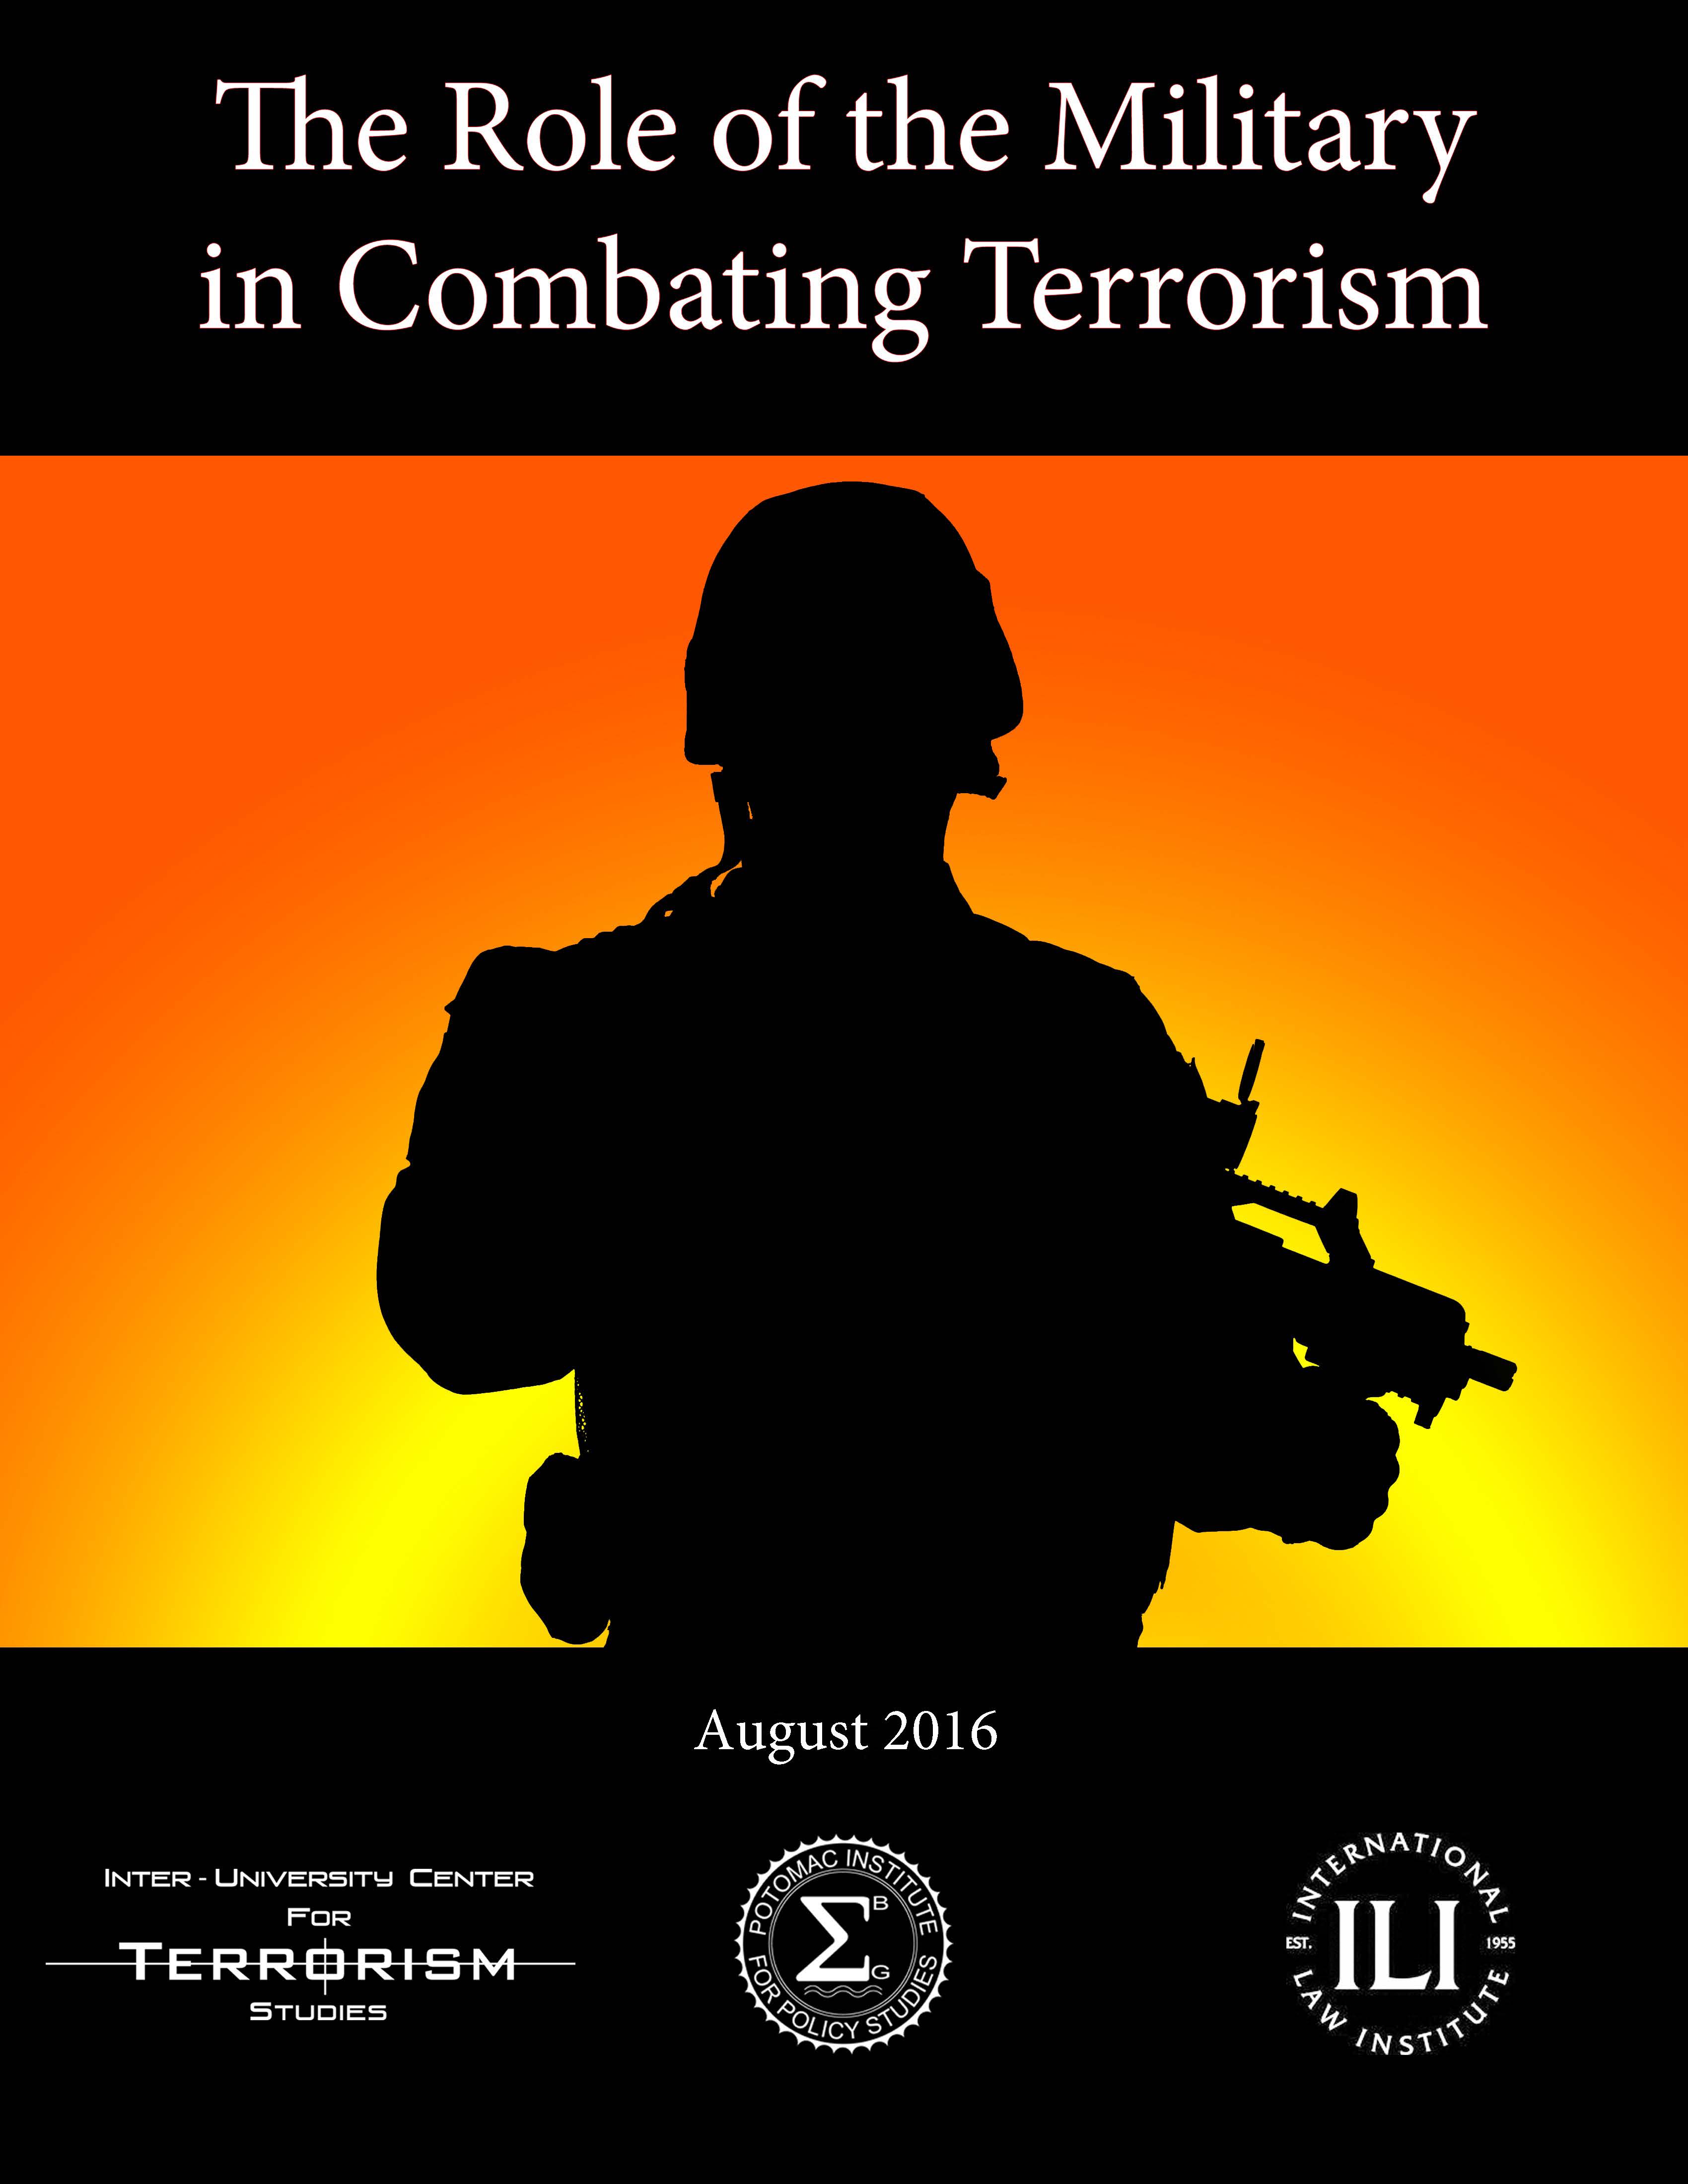 The Role of the Military in Combating Terrorism